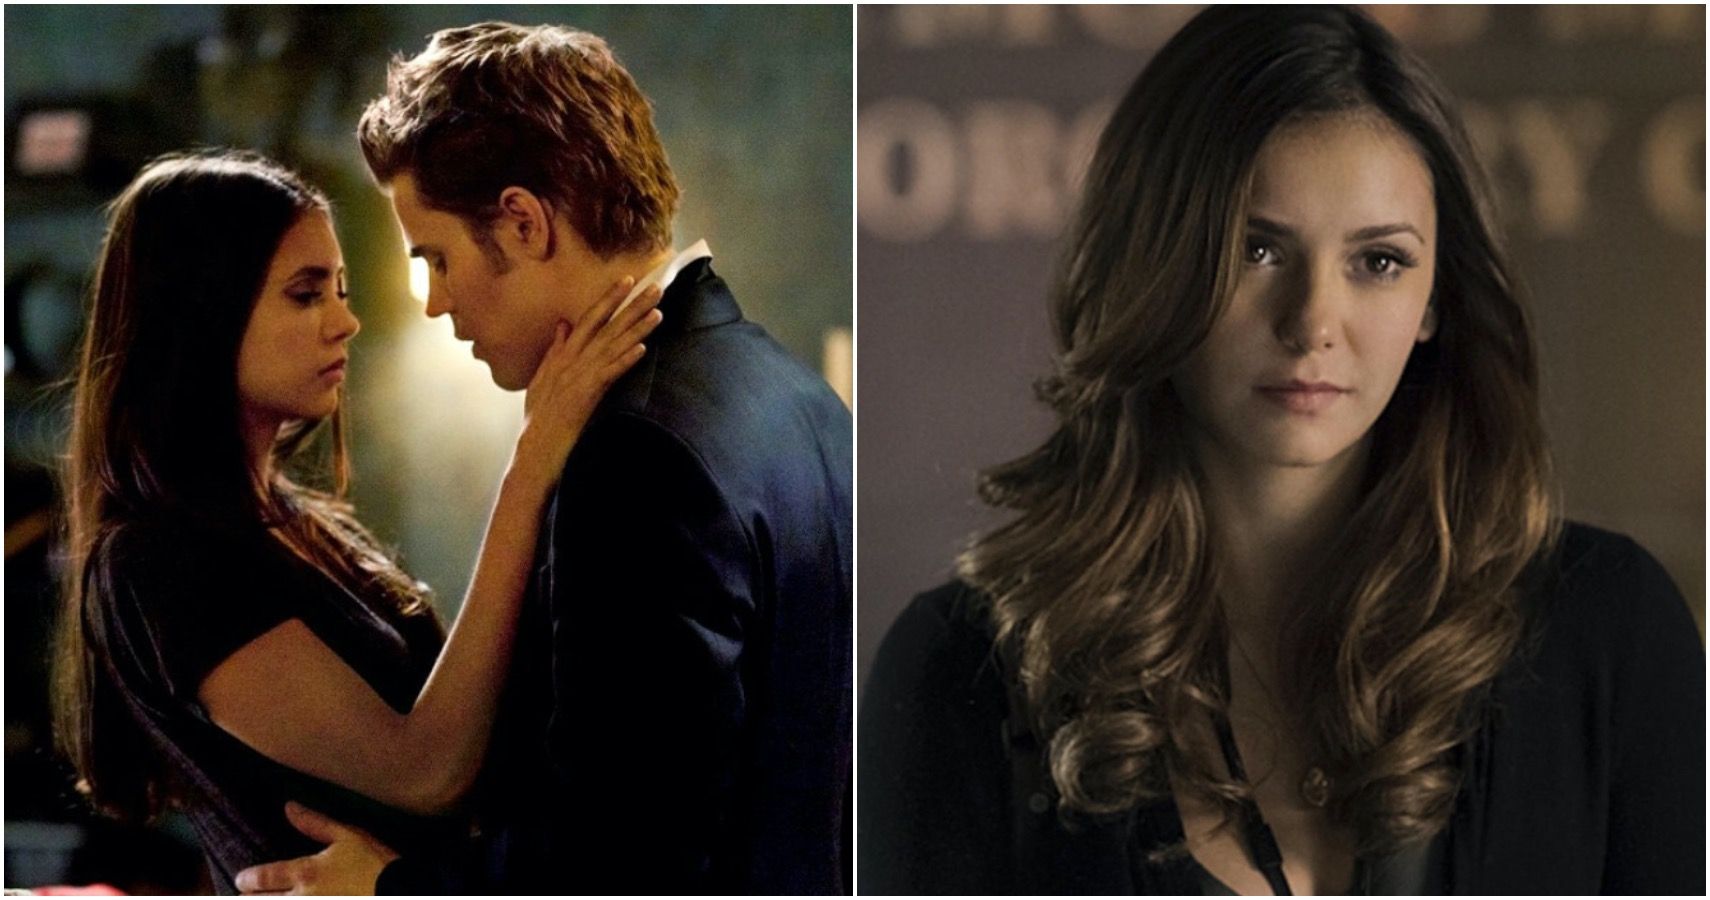 The Vampire Diaries The 7 Doppelgangers Ranked